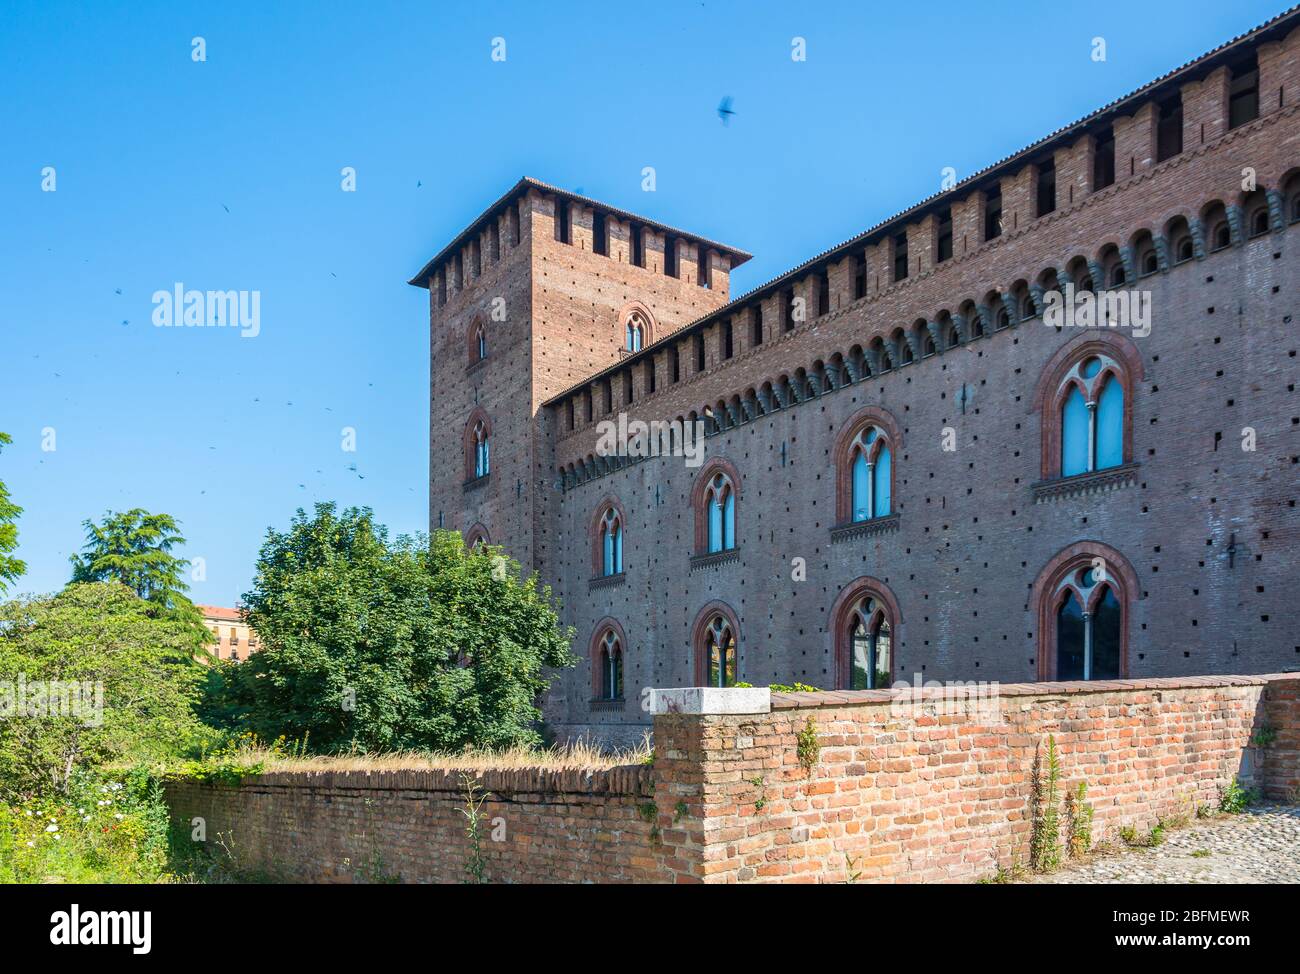 Visconteo Castle. Medieval building with red brick facades. it is a important artistic hub of the city of Pavia, Lombardy, northern Italy Stock Photo